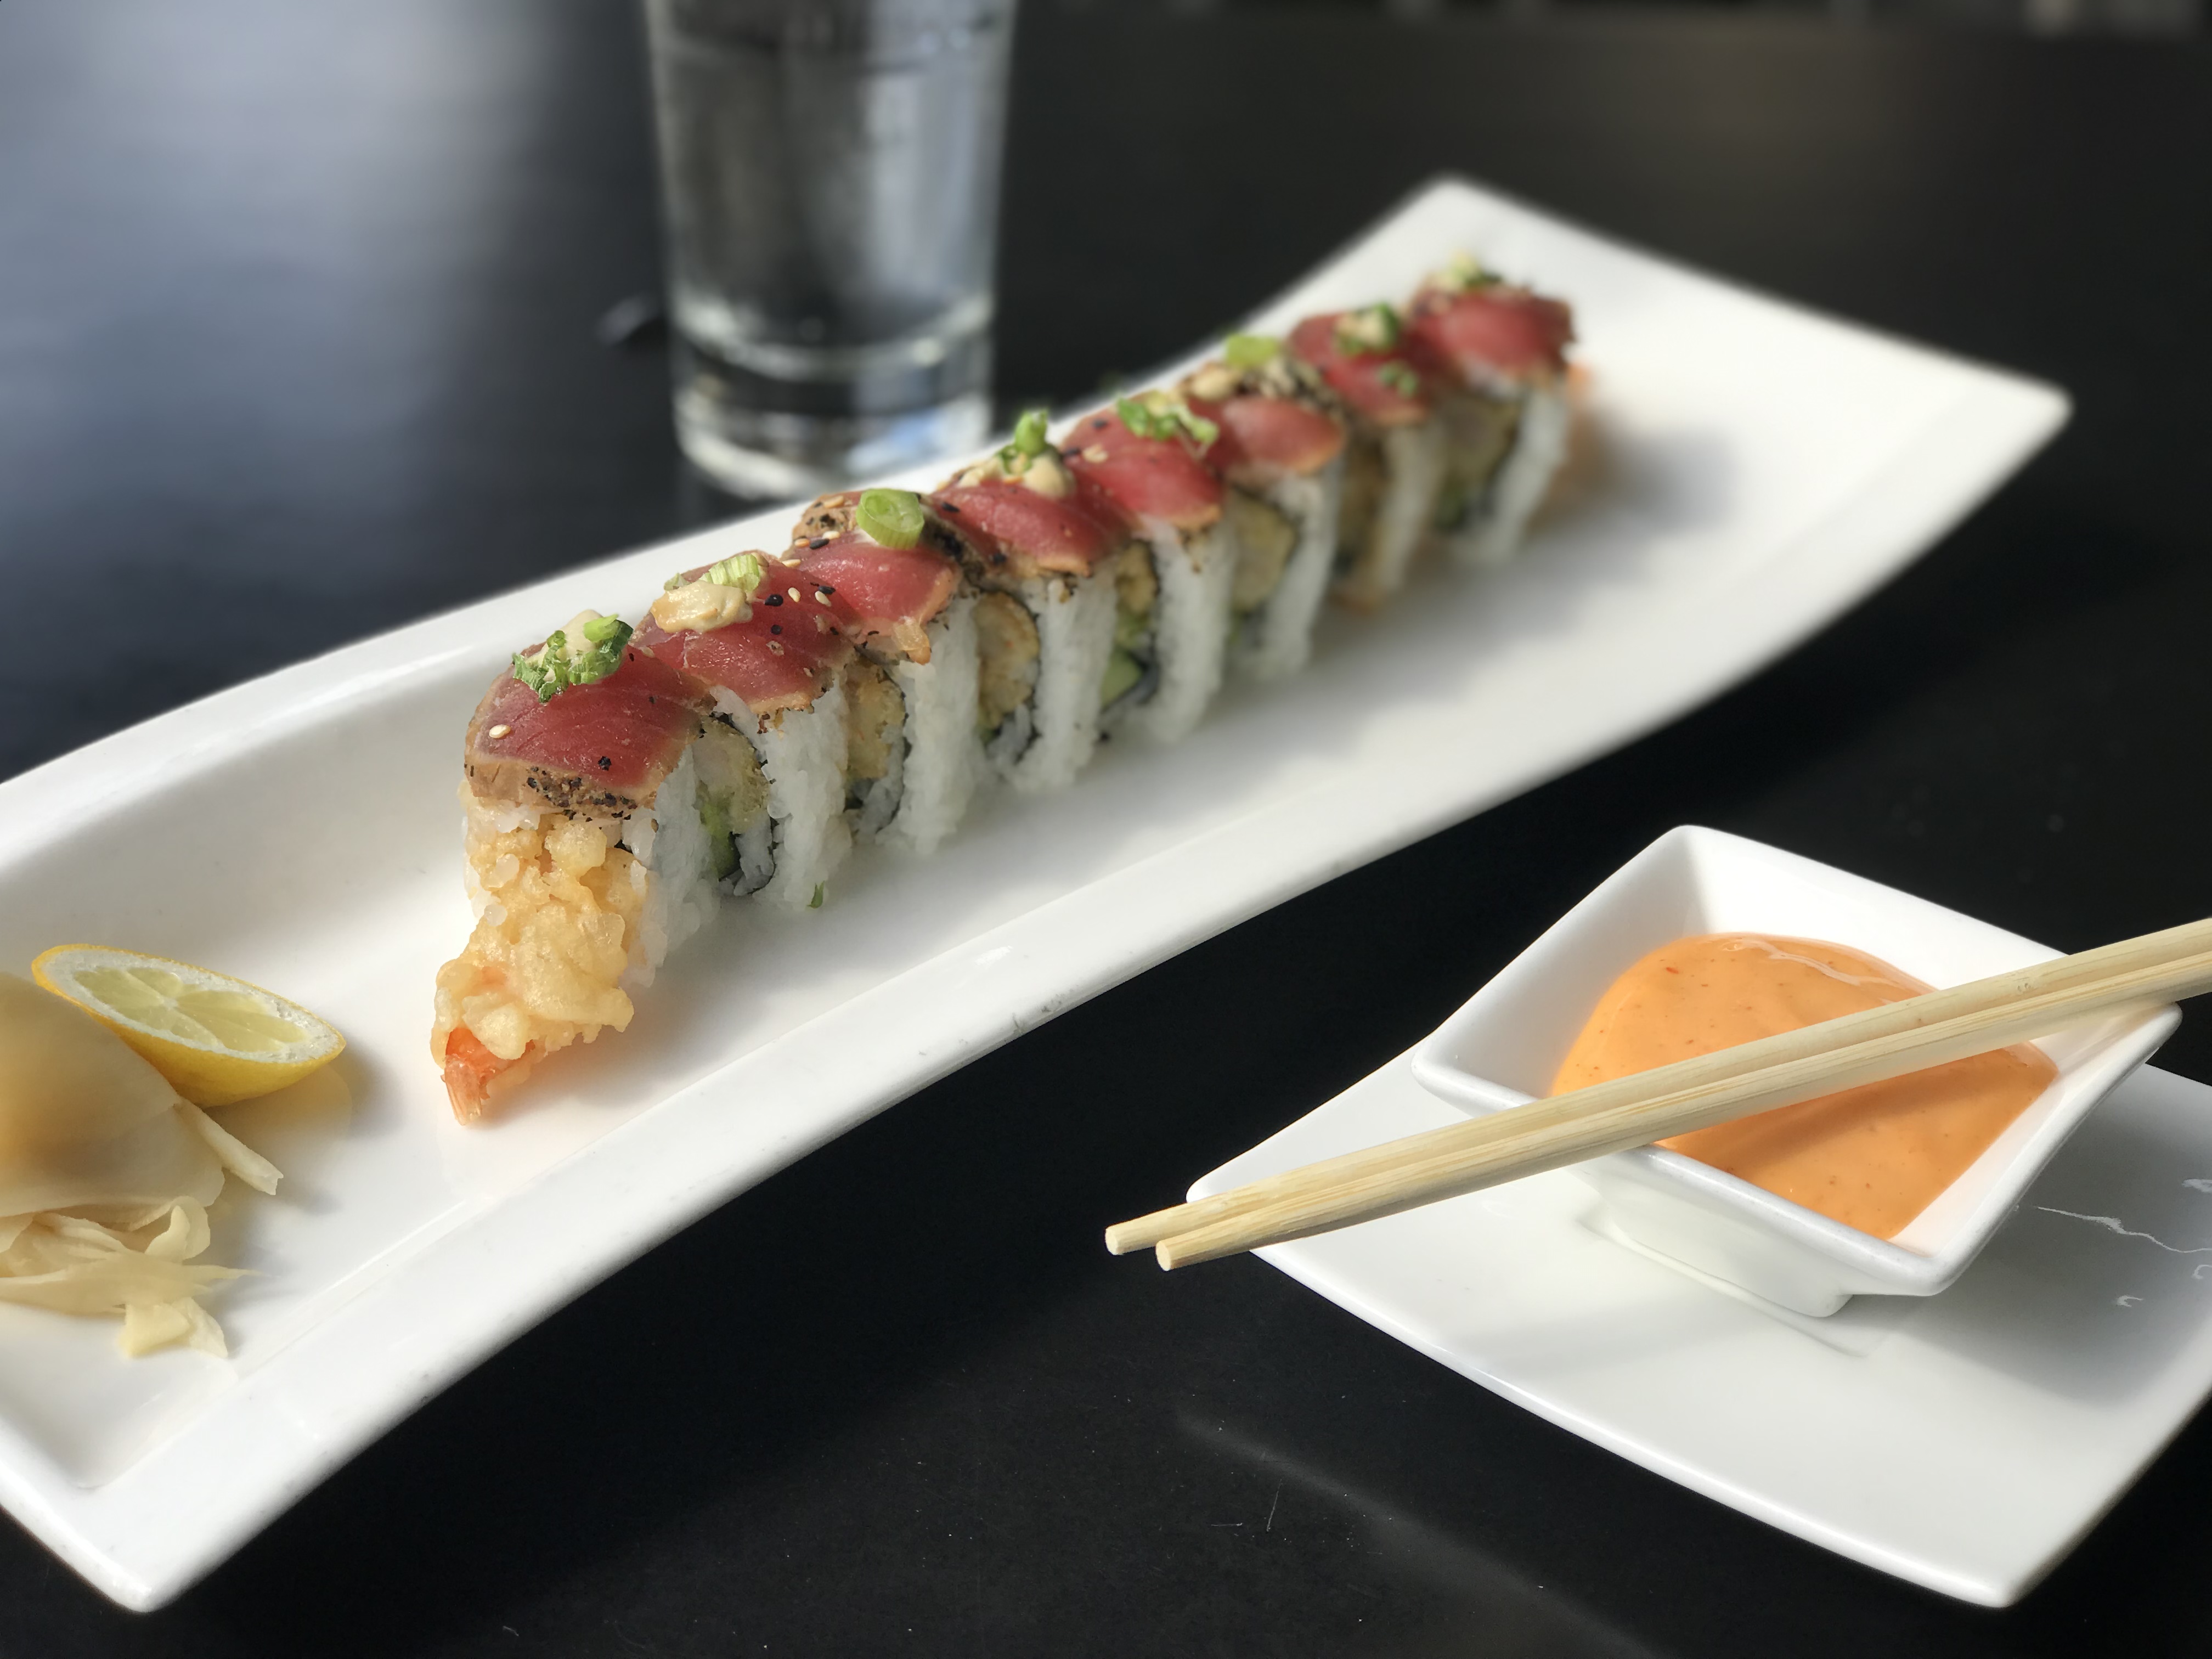 A picture of our Angry Dragon sushi roll sliced and featured on a plate